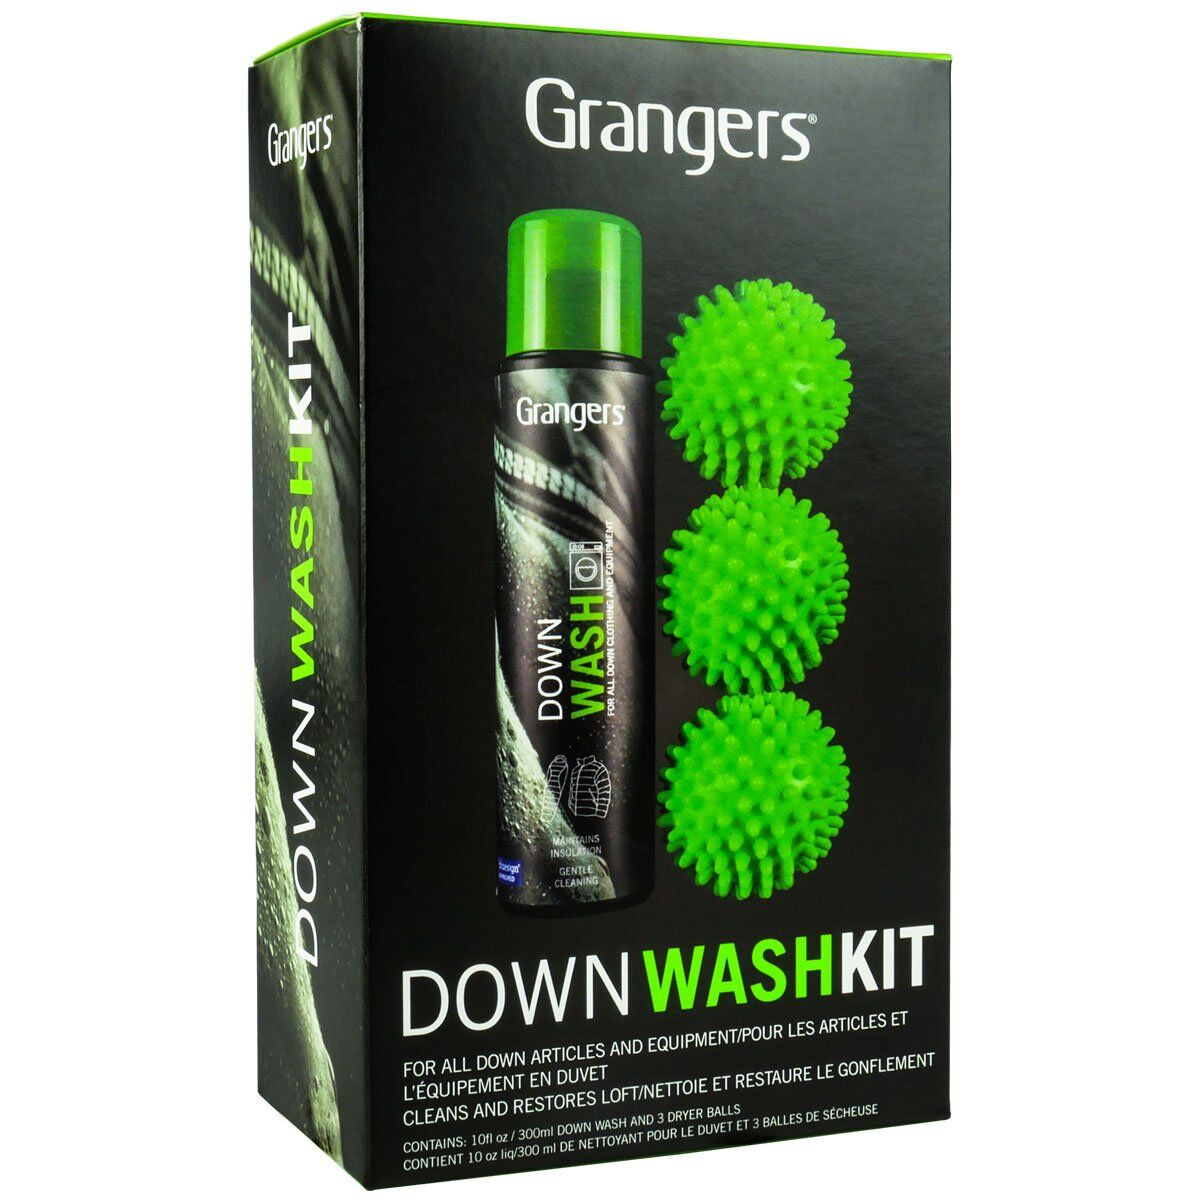 Grangers Down Wash Kit (concentrate) - Detergente